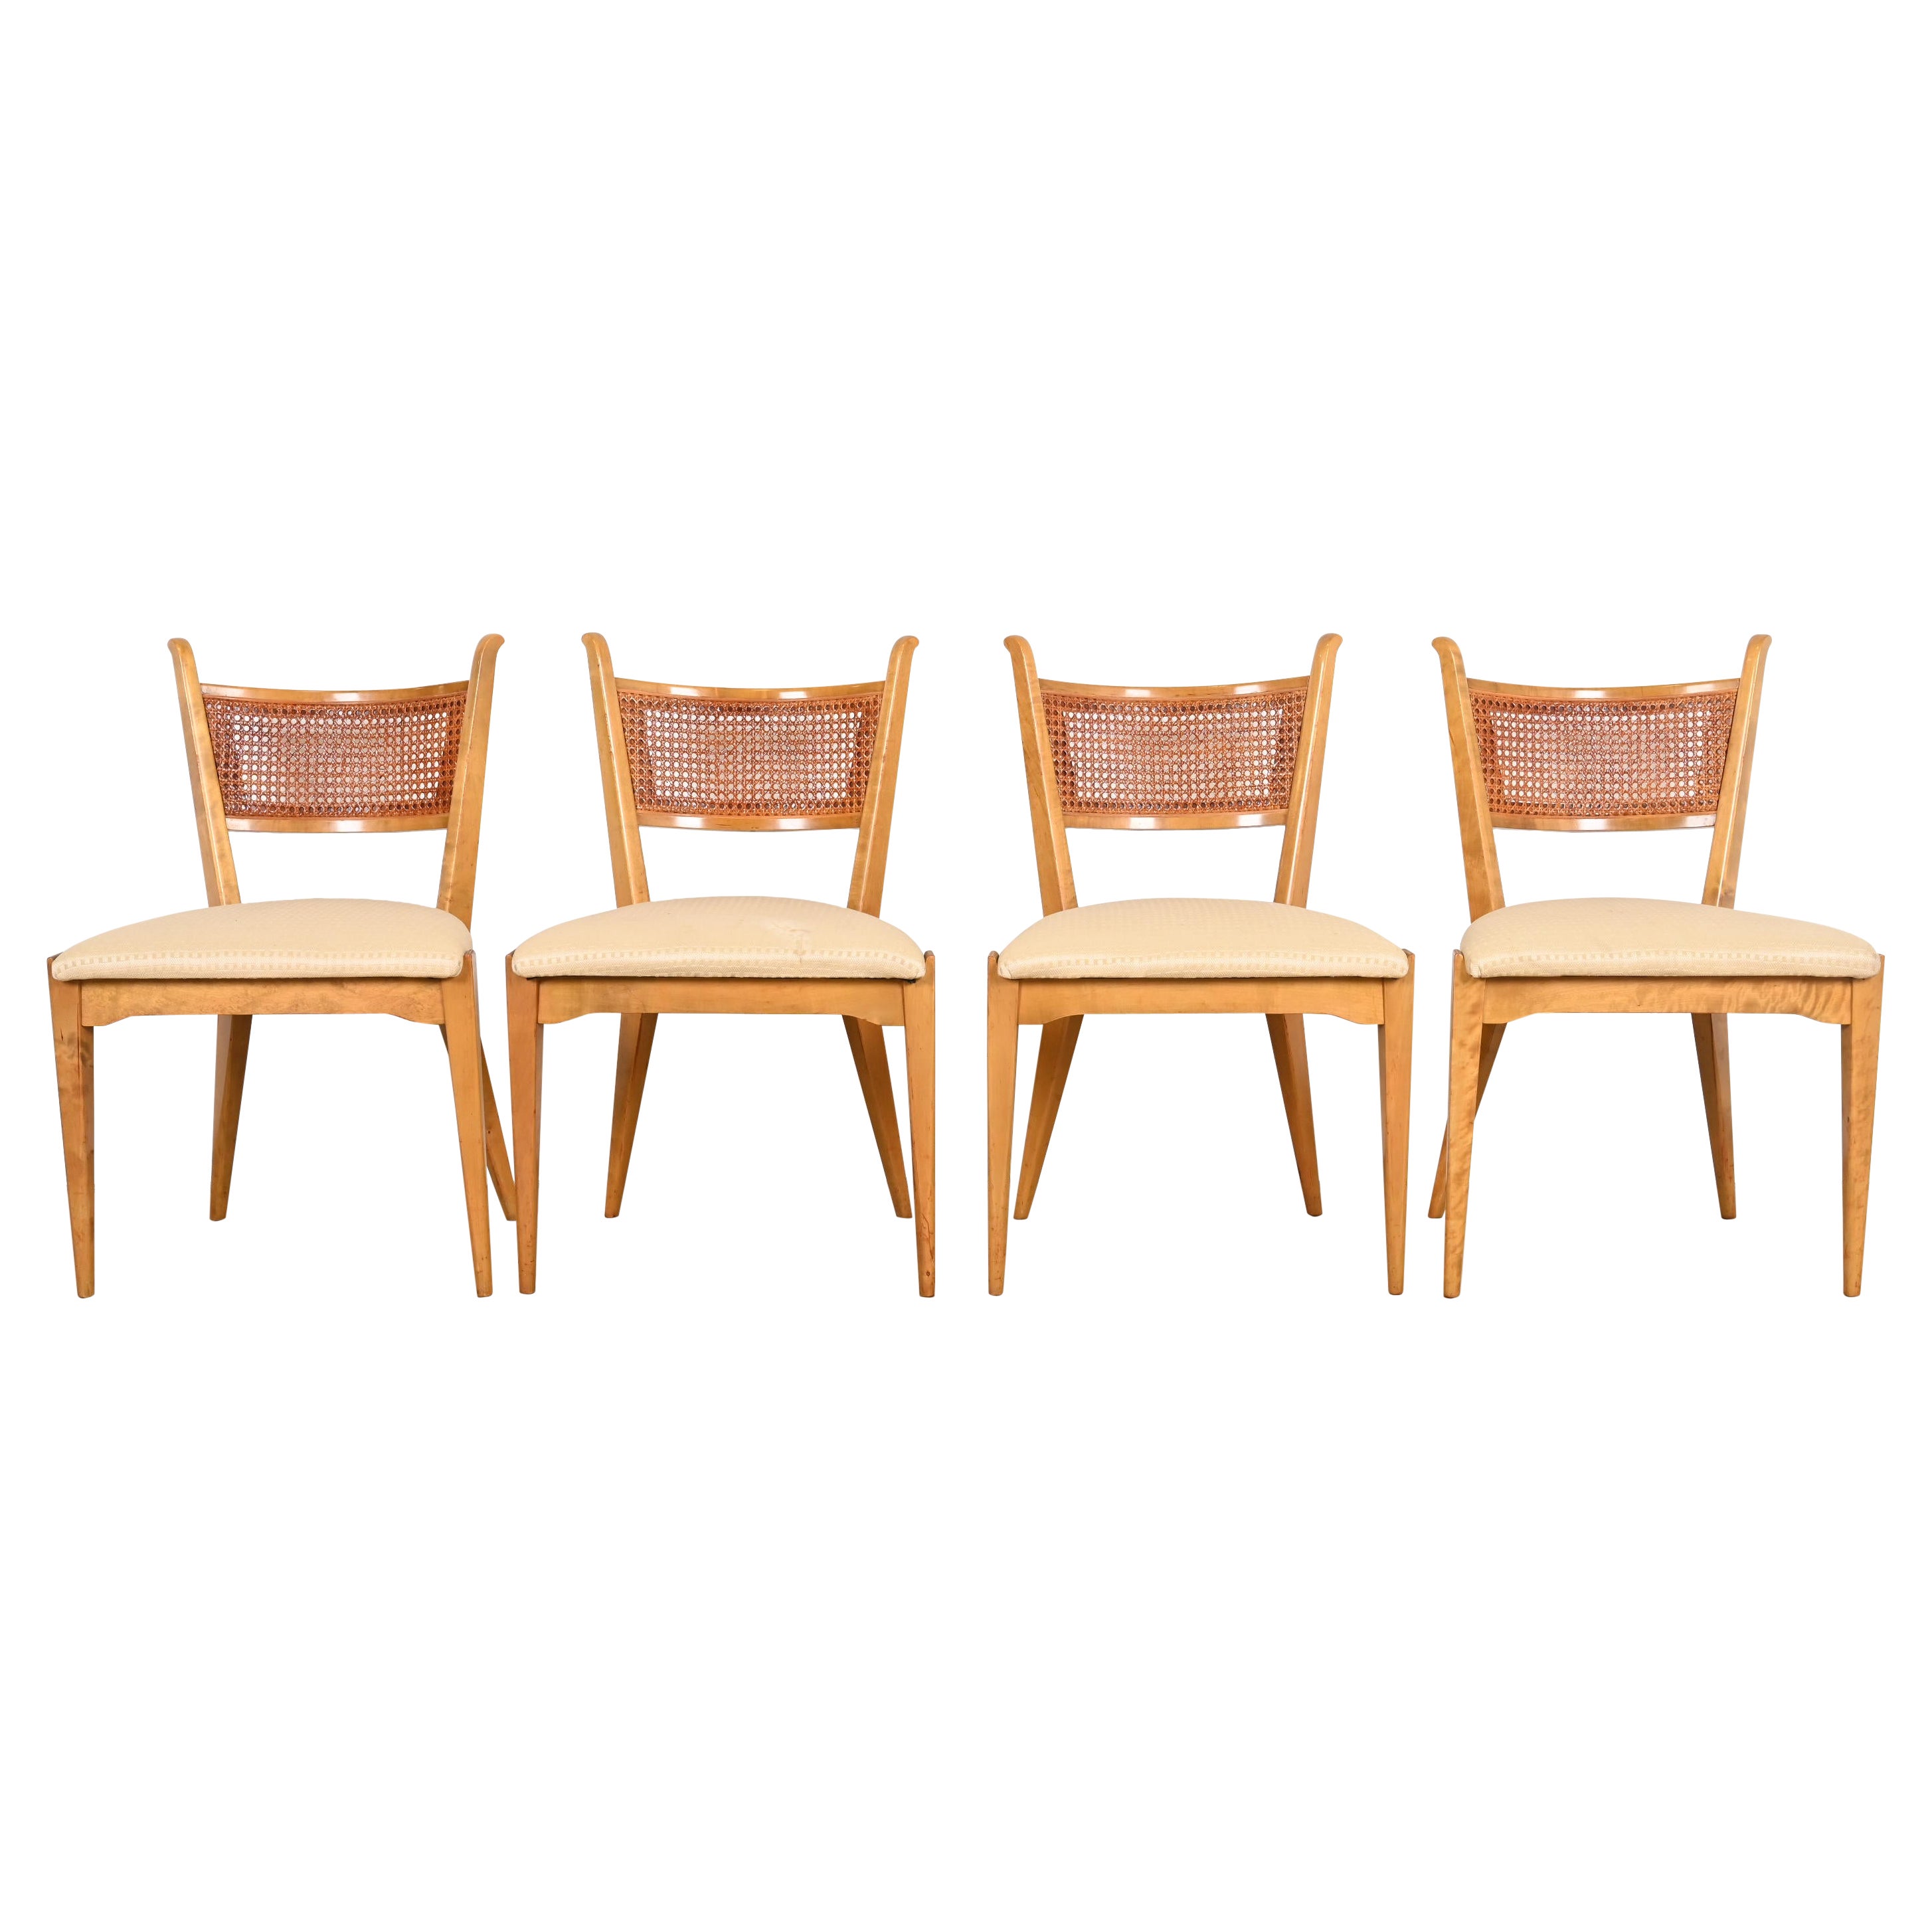 Edmond Spence Swedish Modern Sculpted Maple and Cane Dining Chairs, Set of Four For Sale